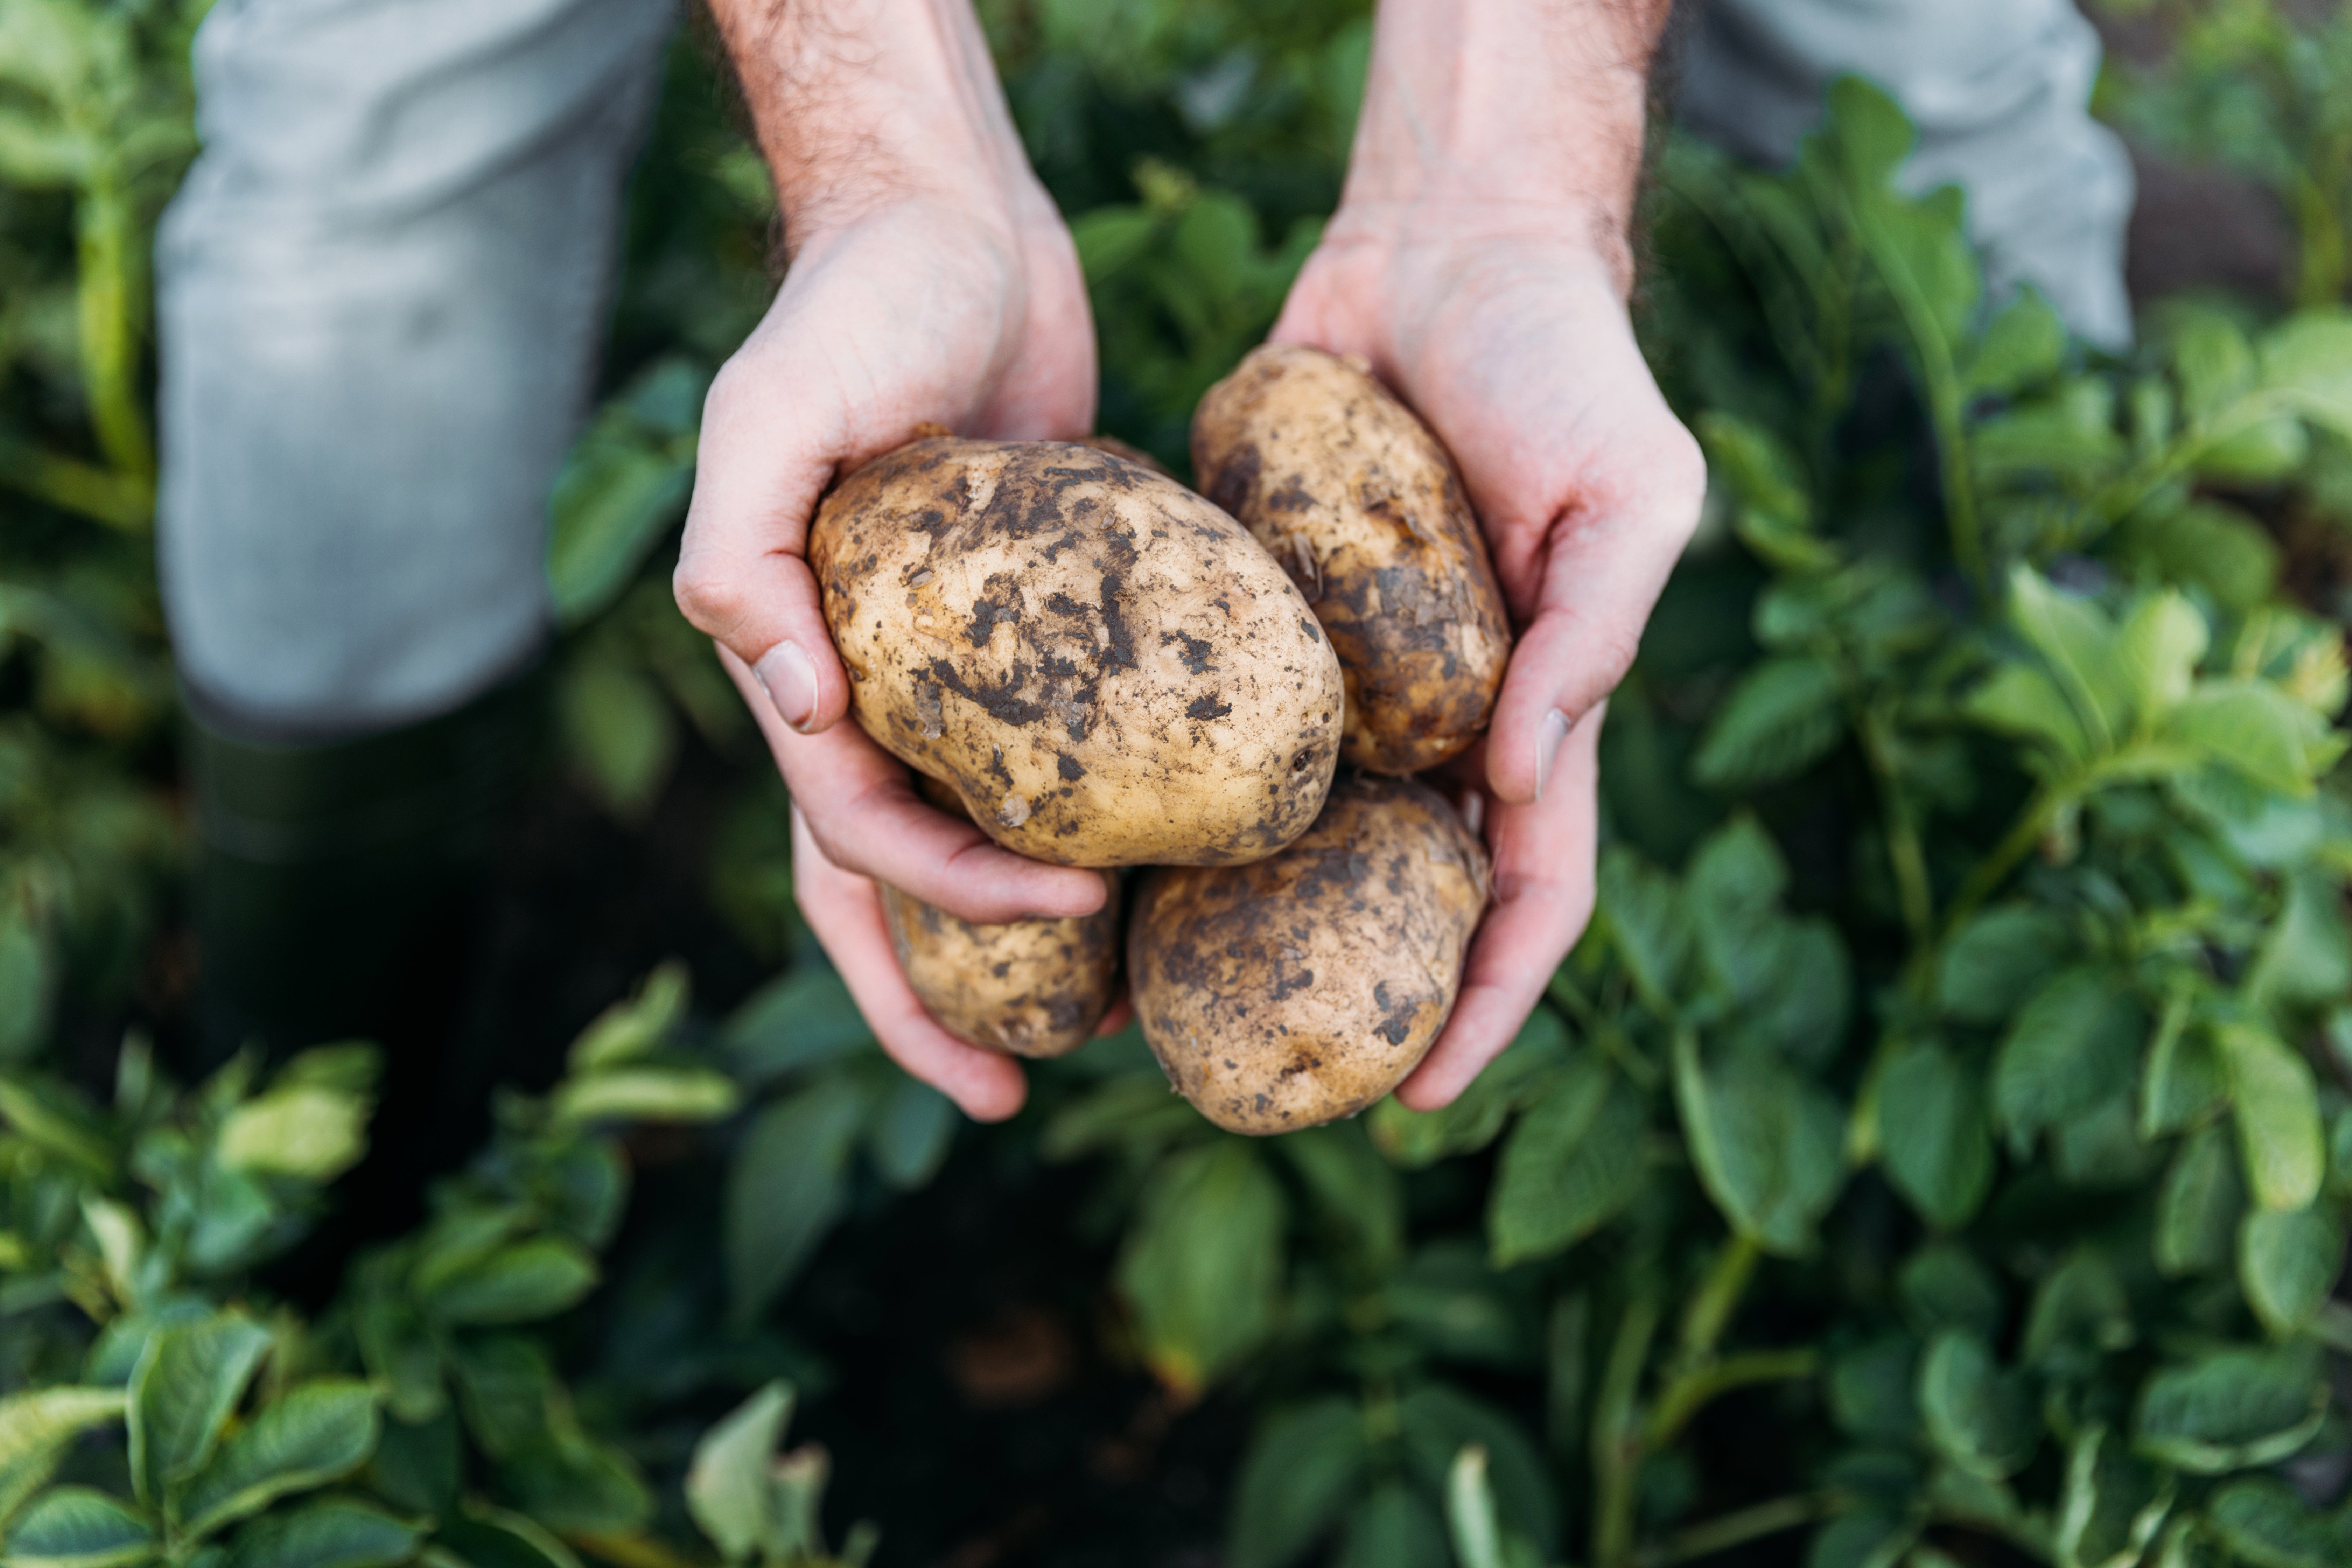 Potatoes can now be stored in the fridge, food experts say